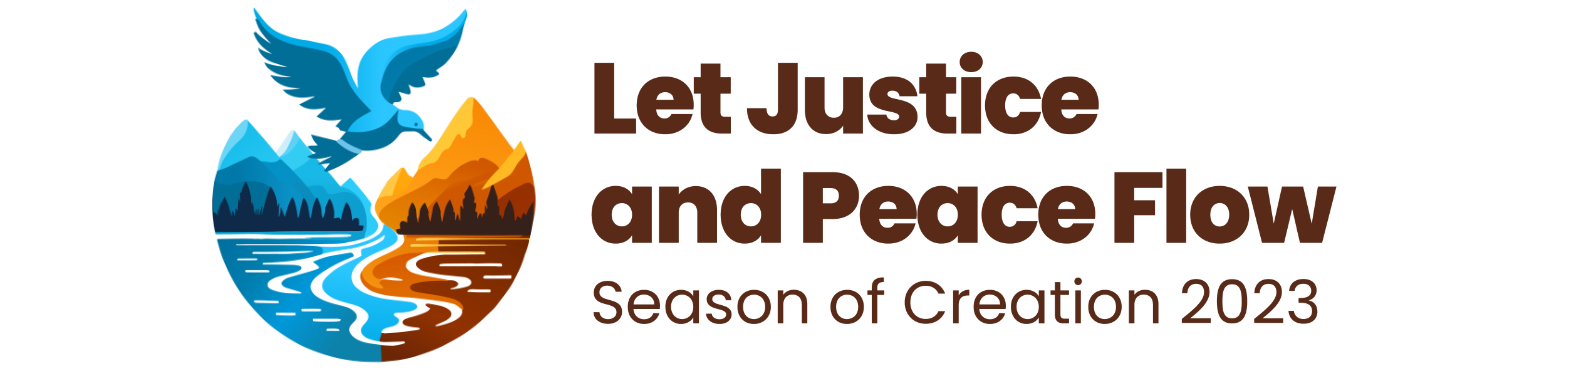 Season of Creation 2023 - Let peace and justice flow